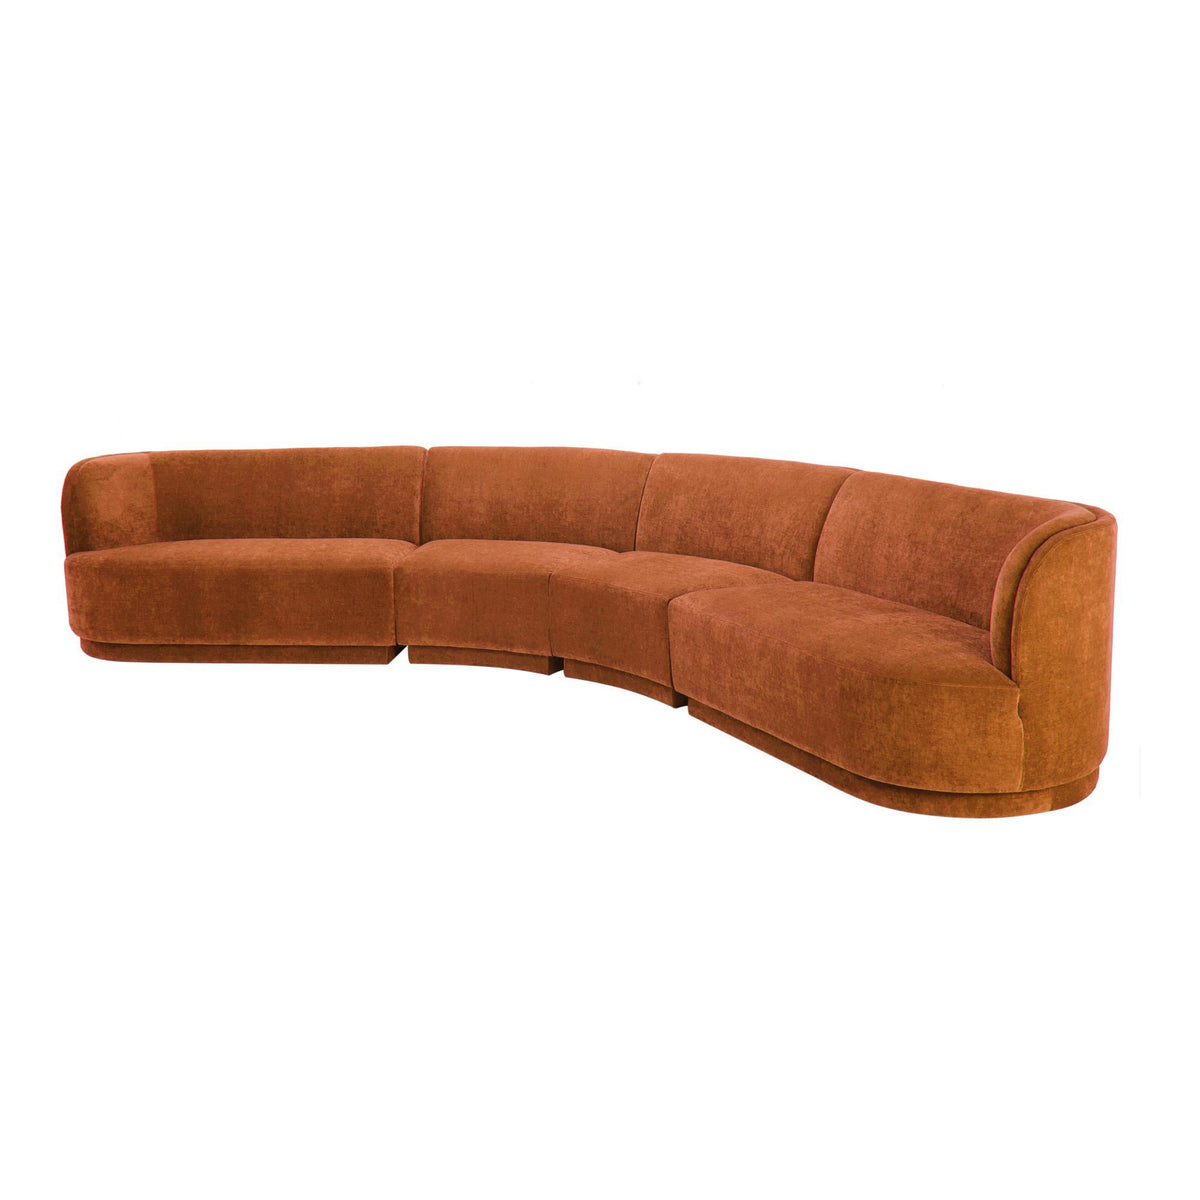 Moe's Home Collection Yoon Eclipse Modular Sectional Chaise Left Fired Rust - JM-1024-06